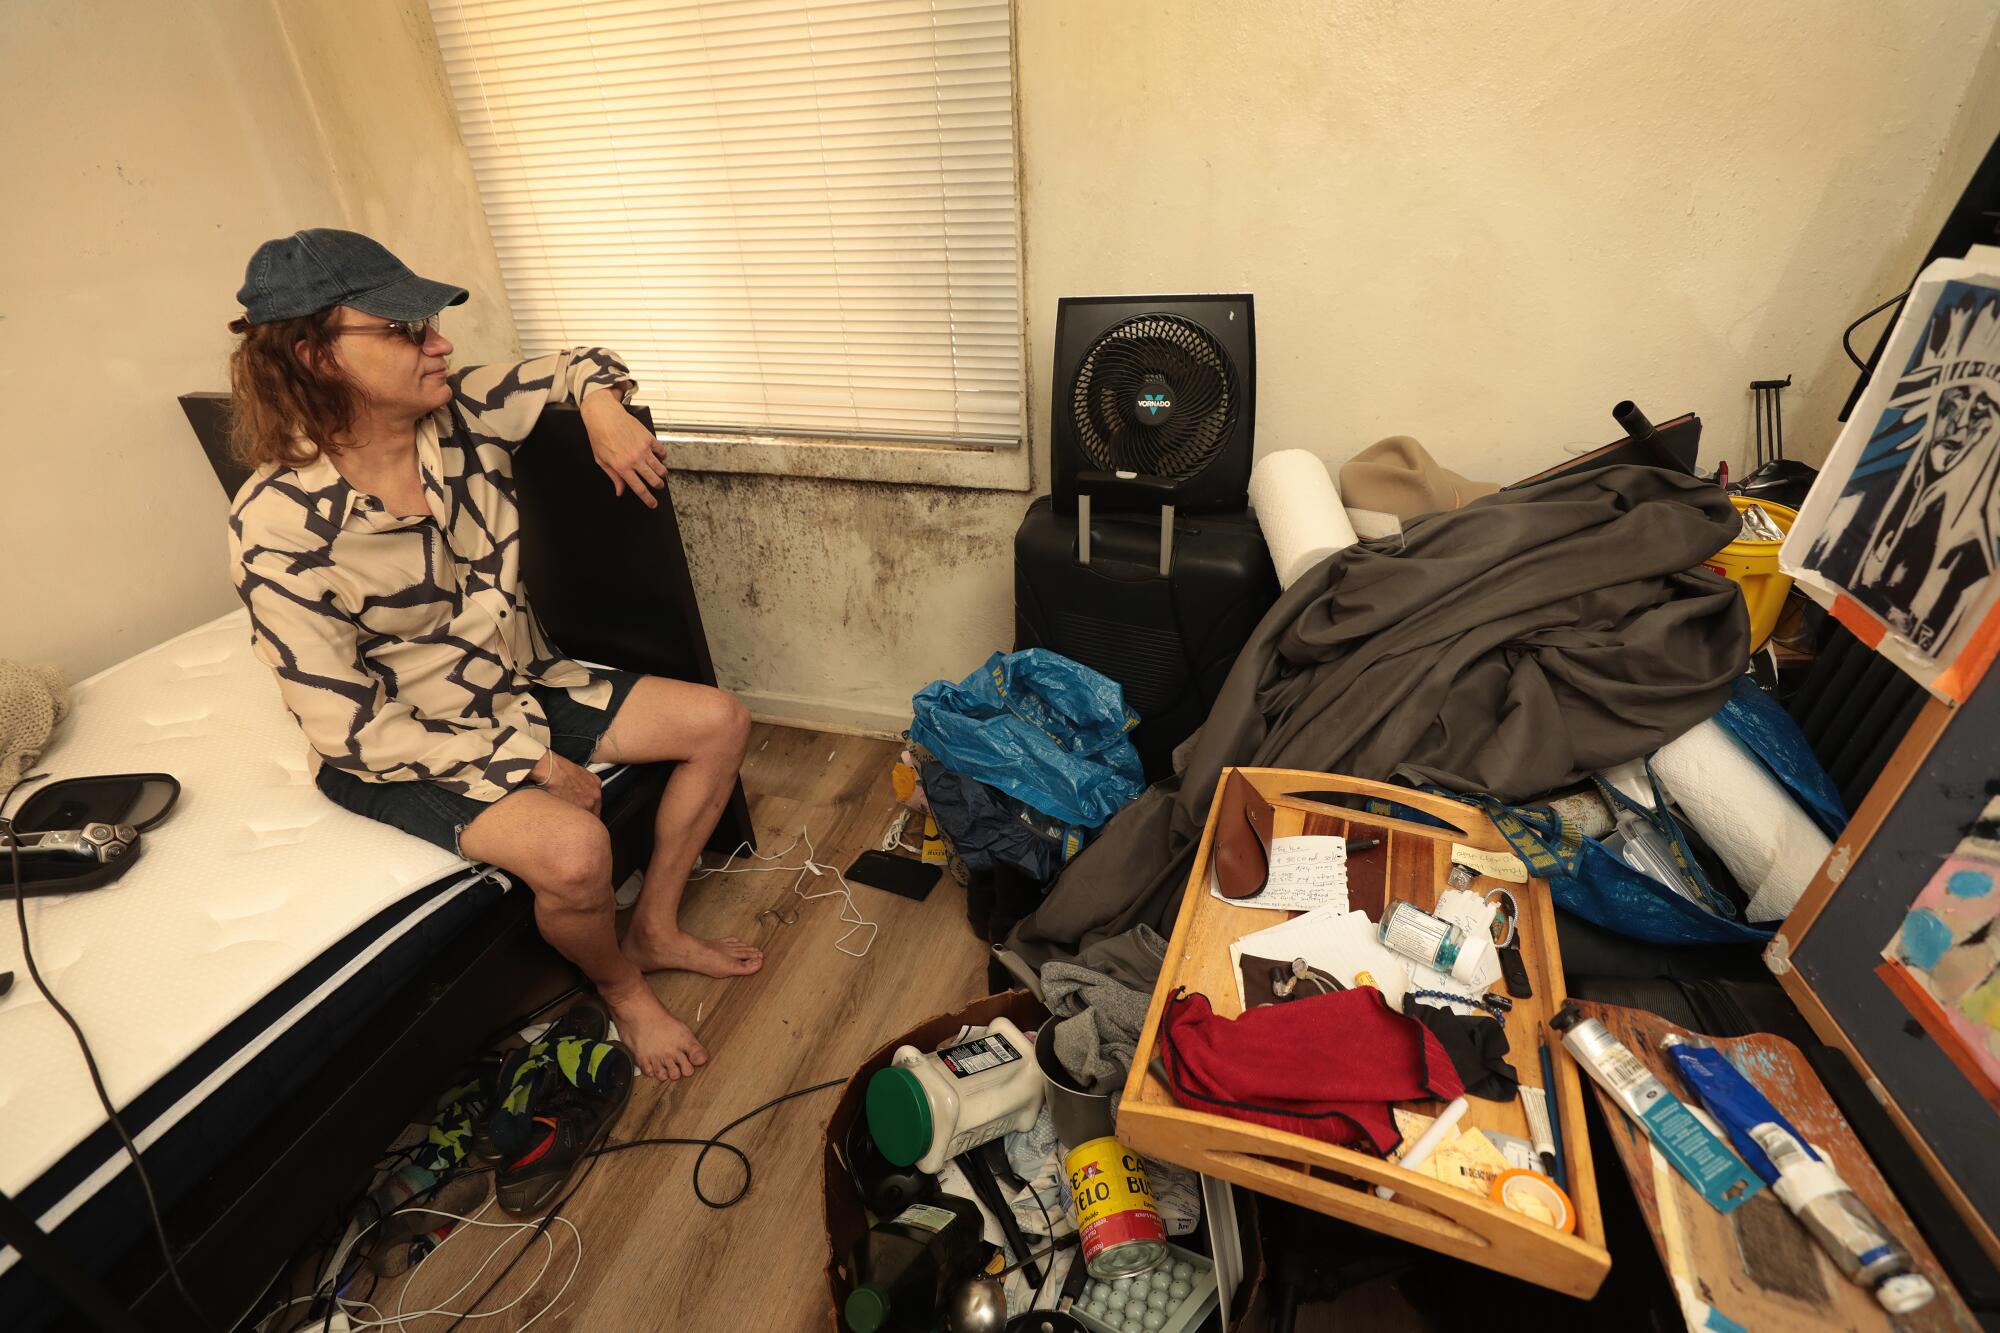 A person sits on a bed in a cluttered room and looks at mold under the window